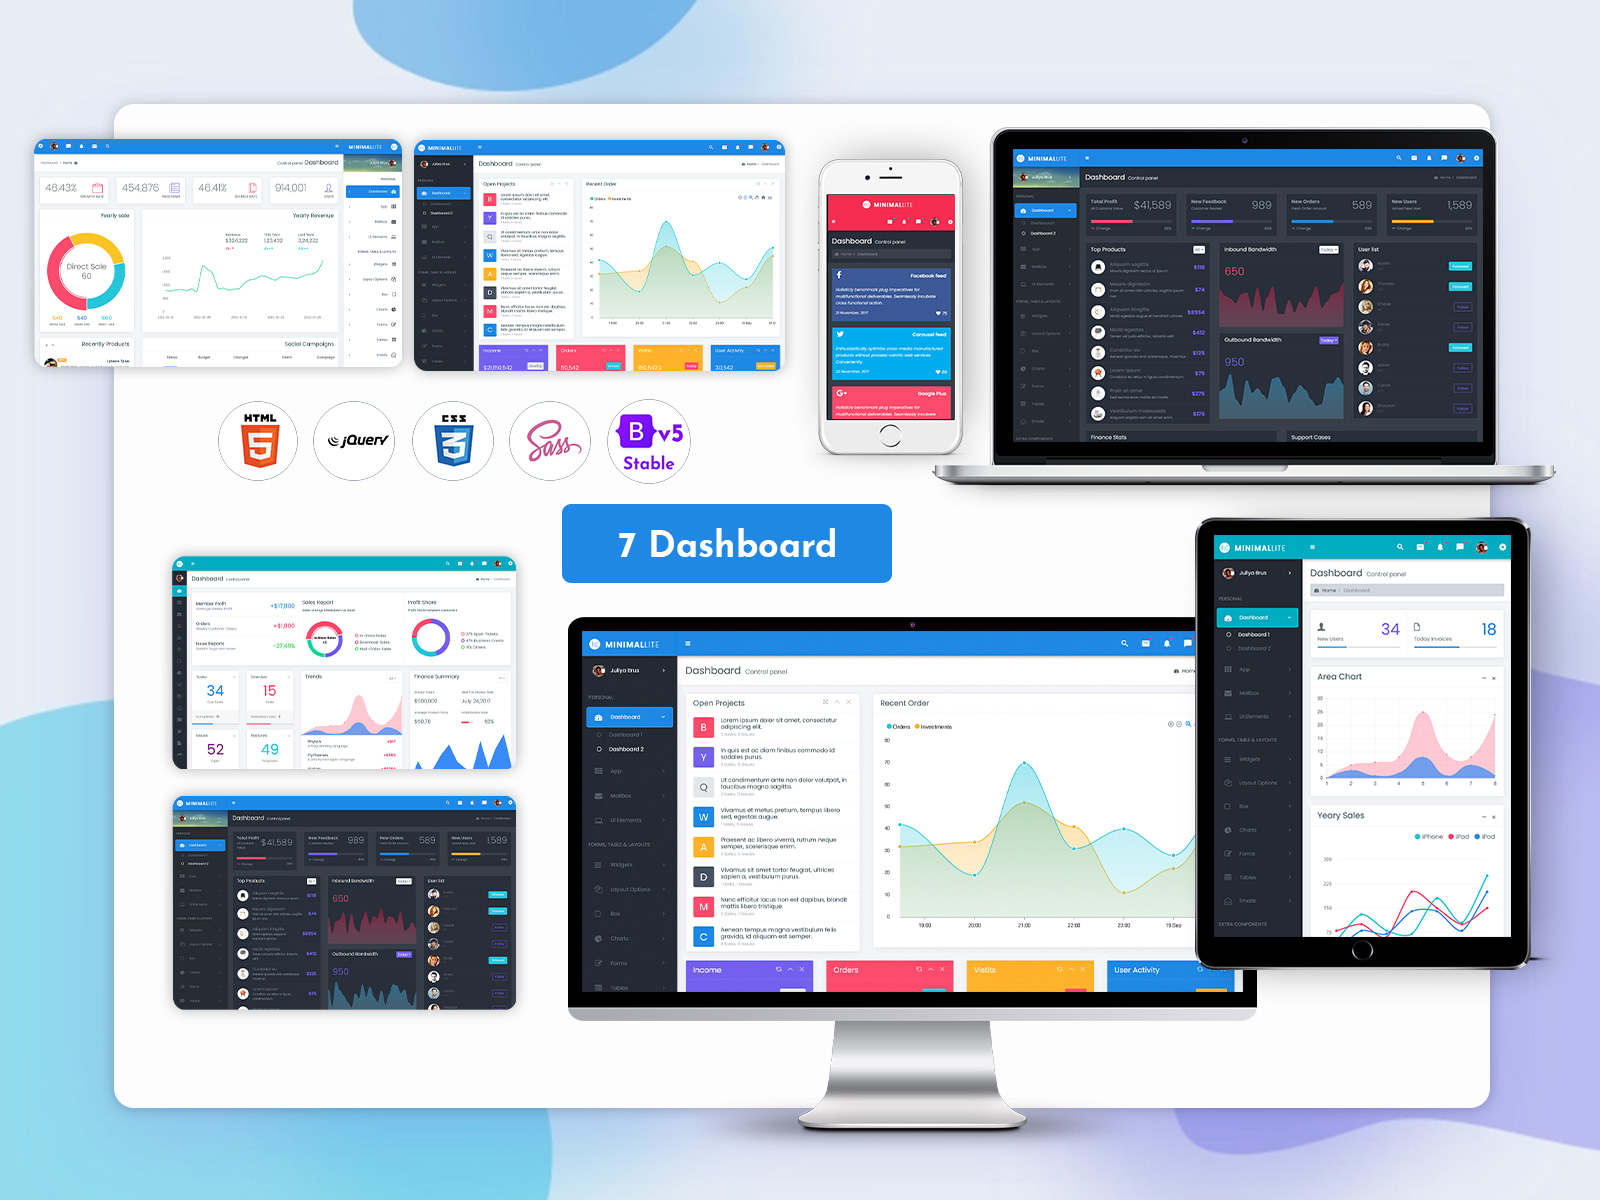 Take Your WebApp To The Next Level With Our Premium Admin Template. Boost Productivity, Enhance User Experience, And Achieve Success. Upgrade Now!